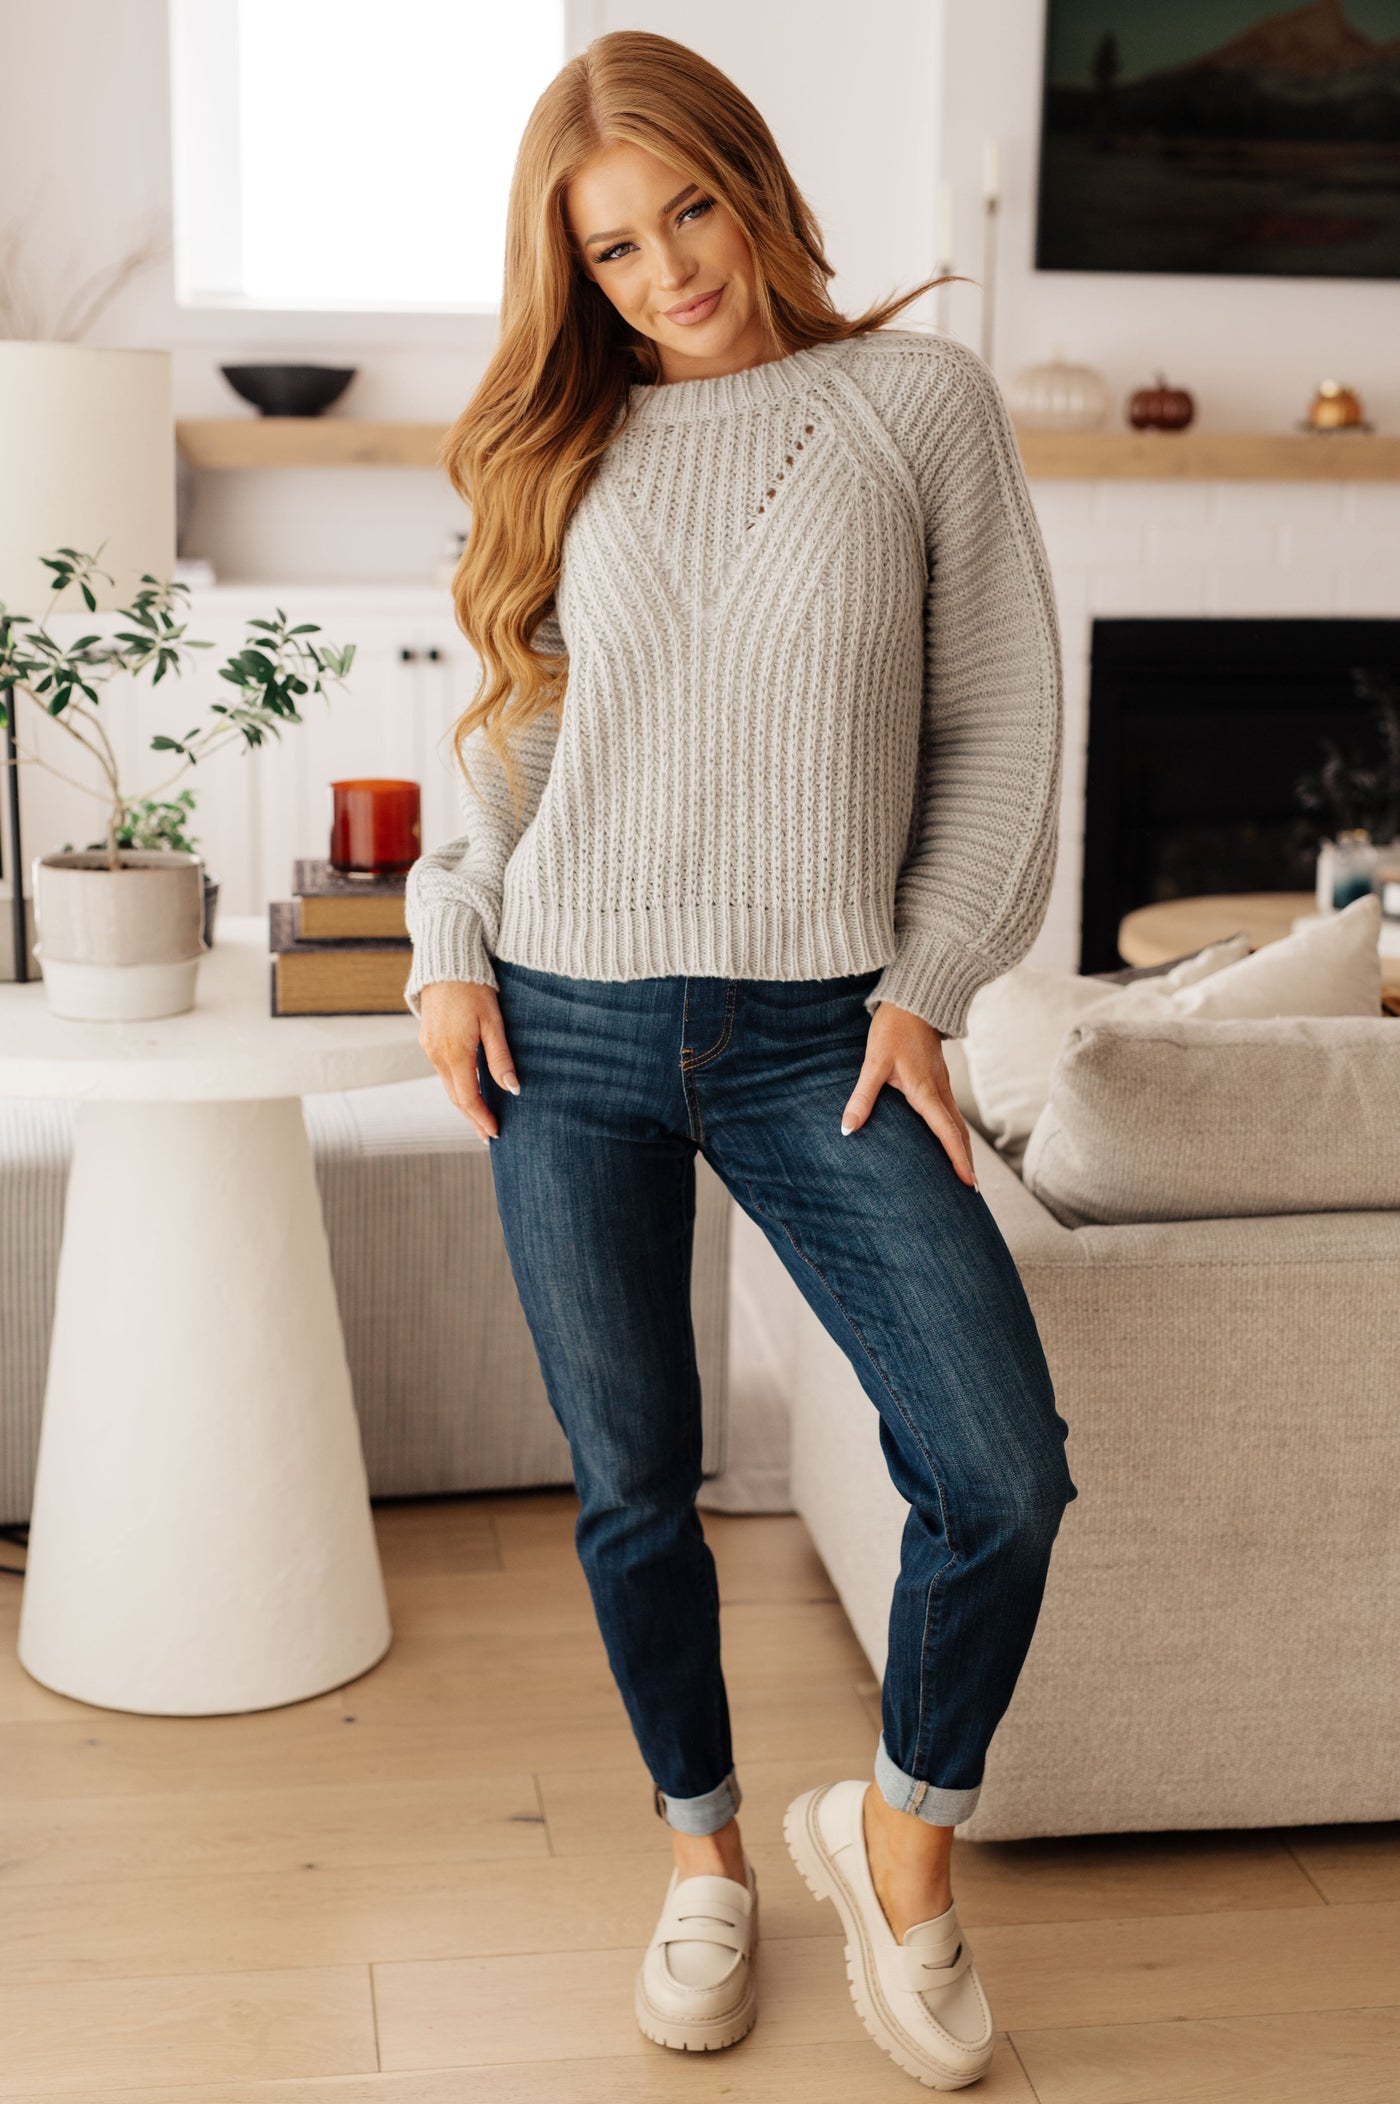 Look effortlessly stylish in the Roll on By Balloon Sleeve Sweater